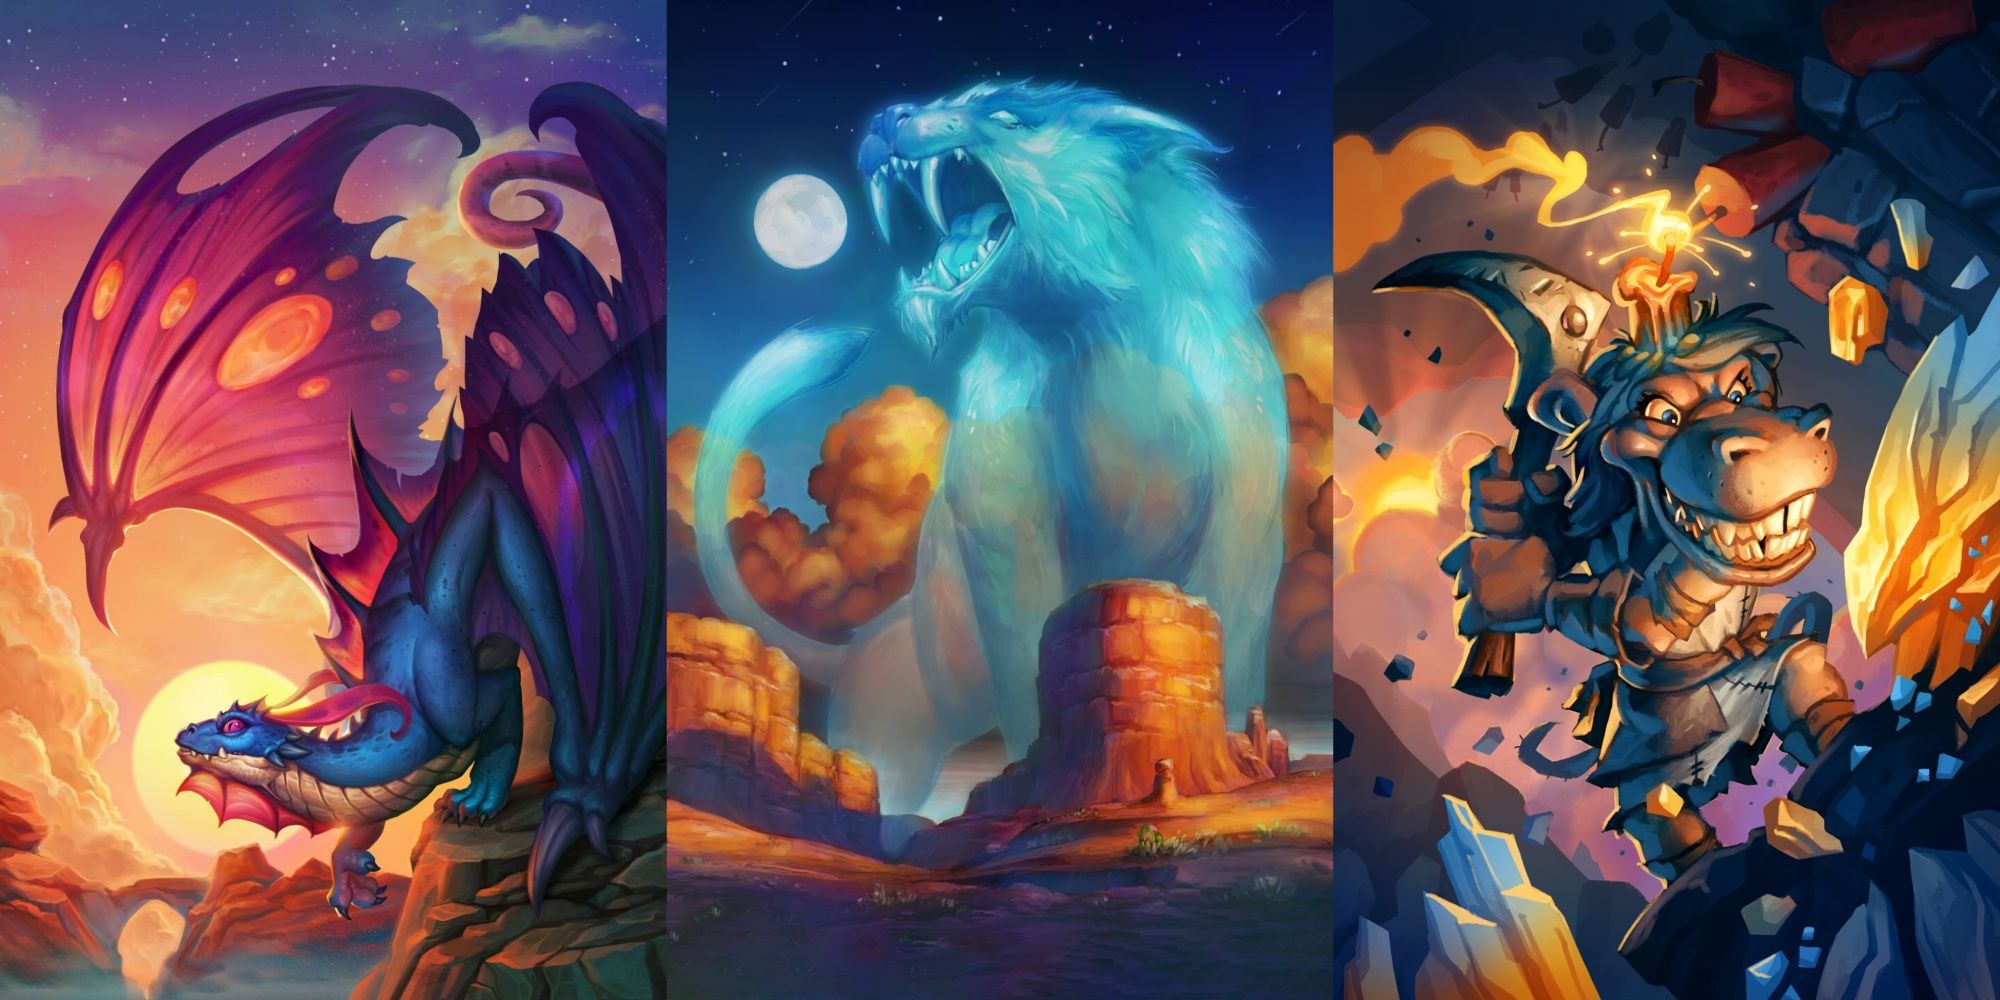 Hearthstone: Showdown in the Badlands Card Reviews 